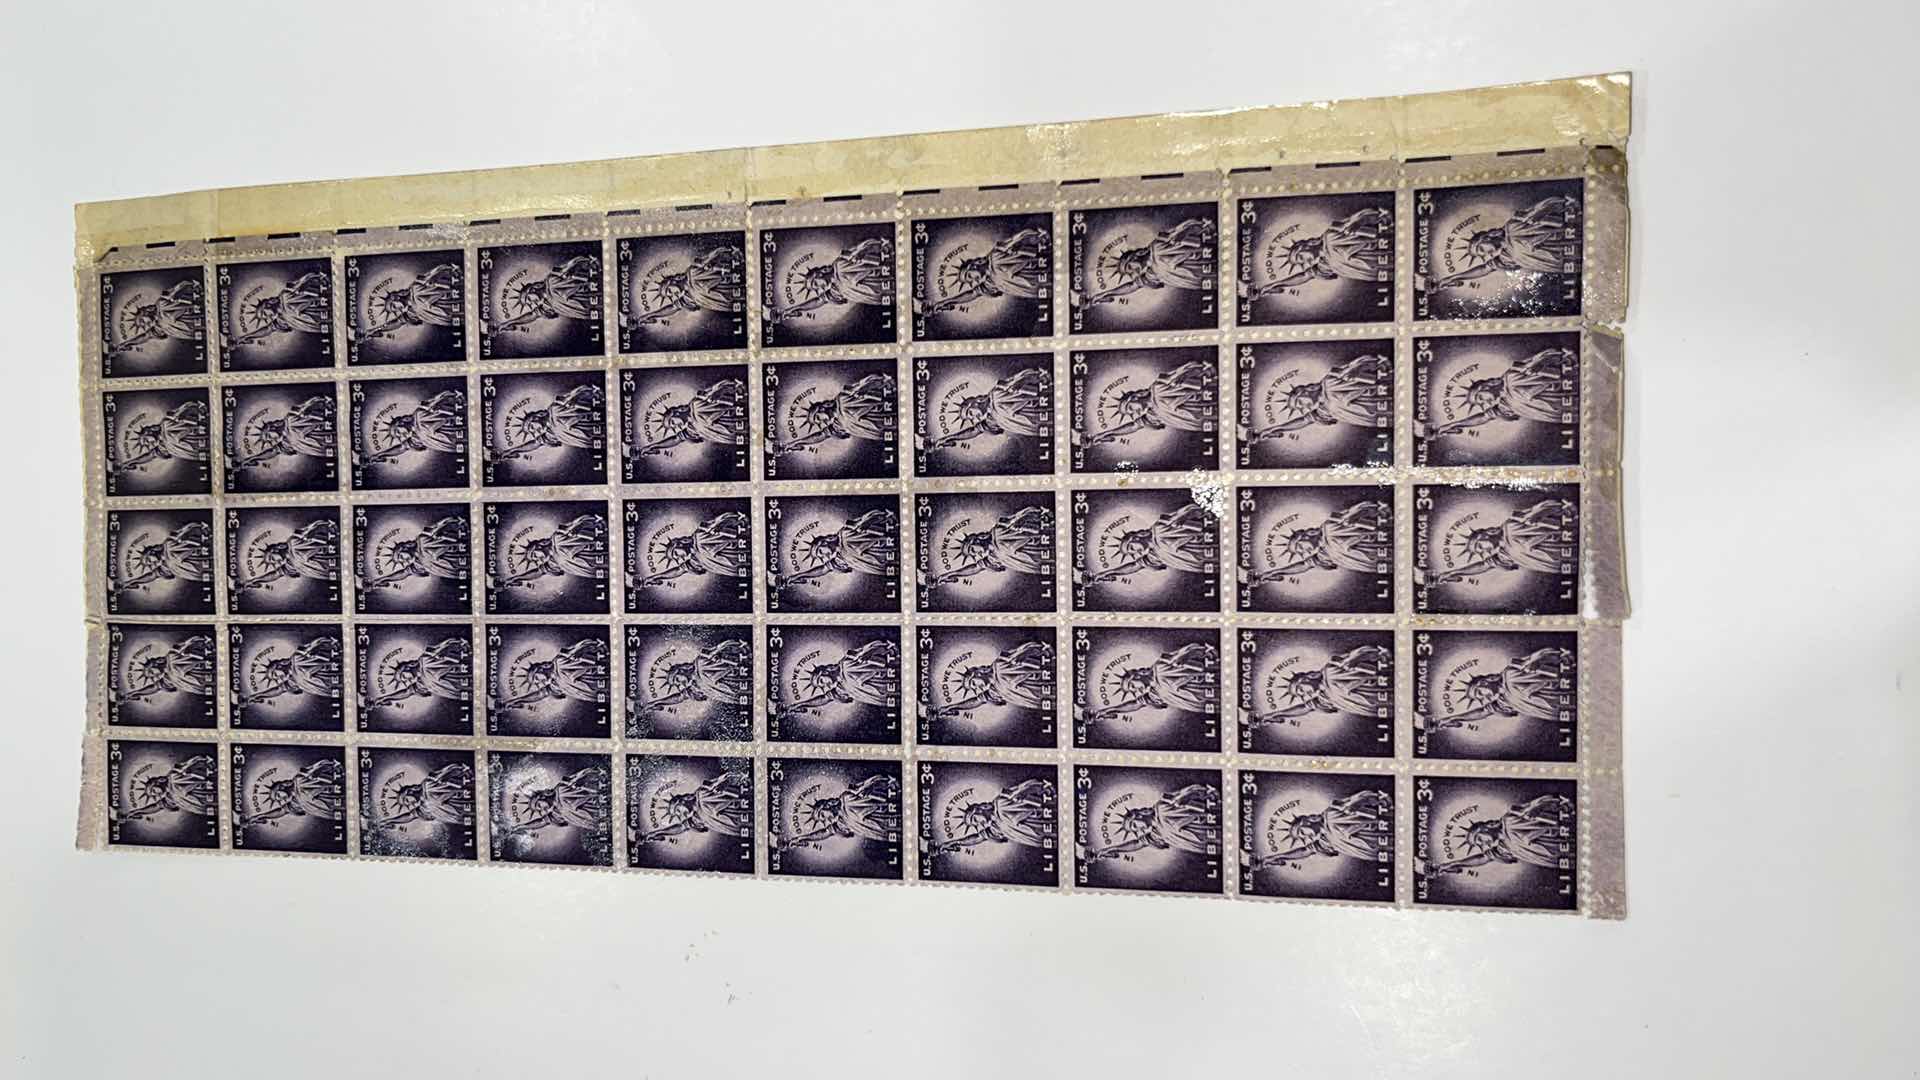 Photo 2 of US 3 CENT LADY LIBERTY STAMPS BLOCK OF 50 x 2 *STUCK BACK TO BACK